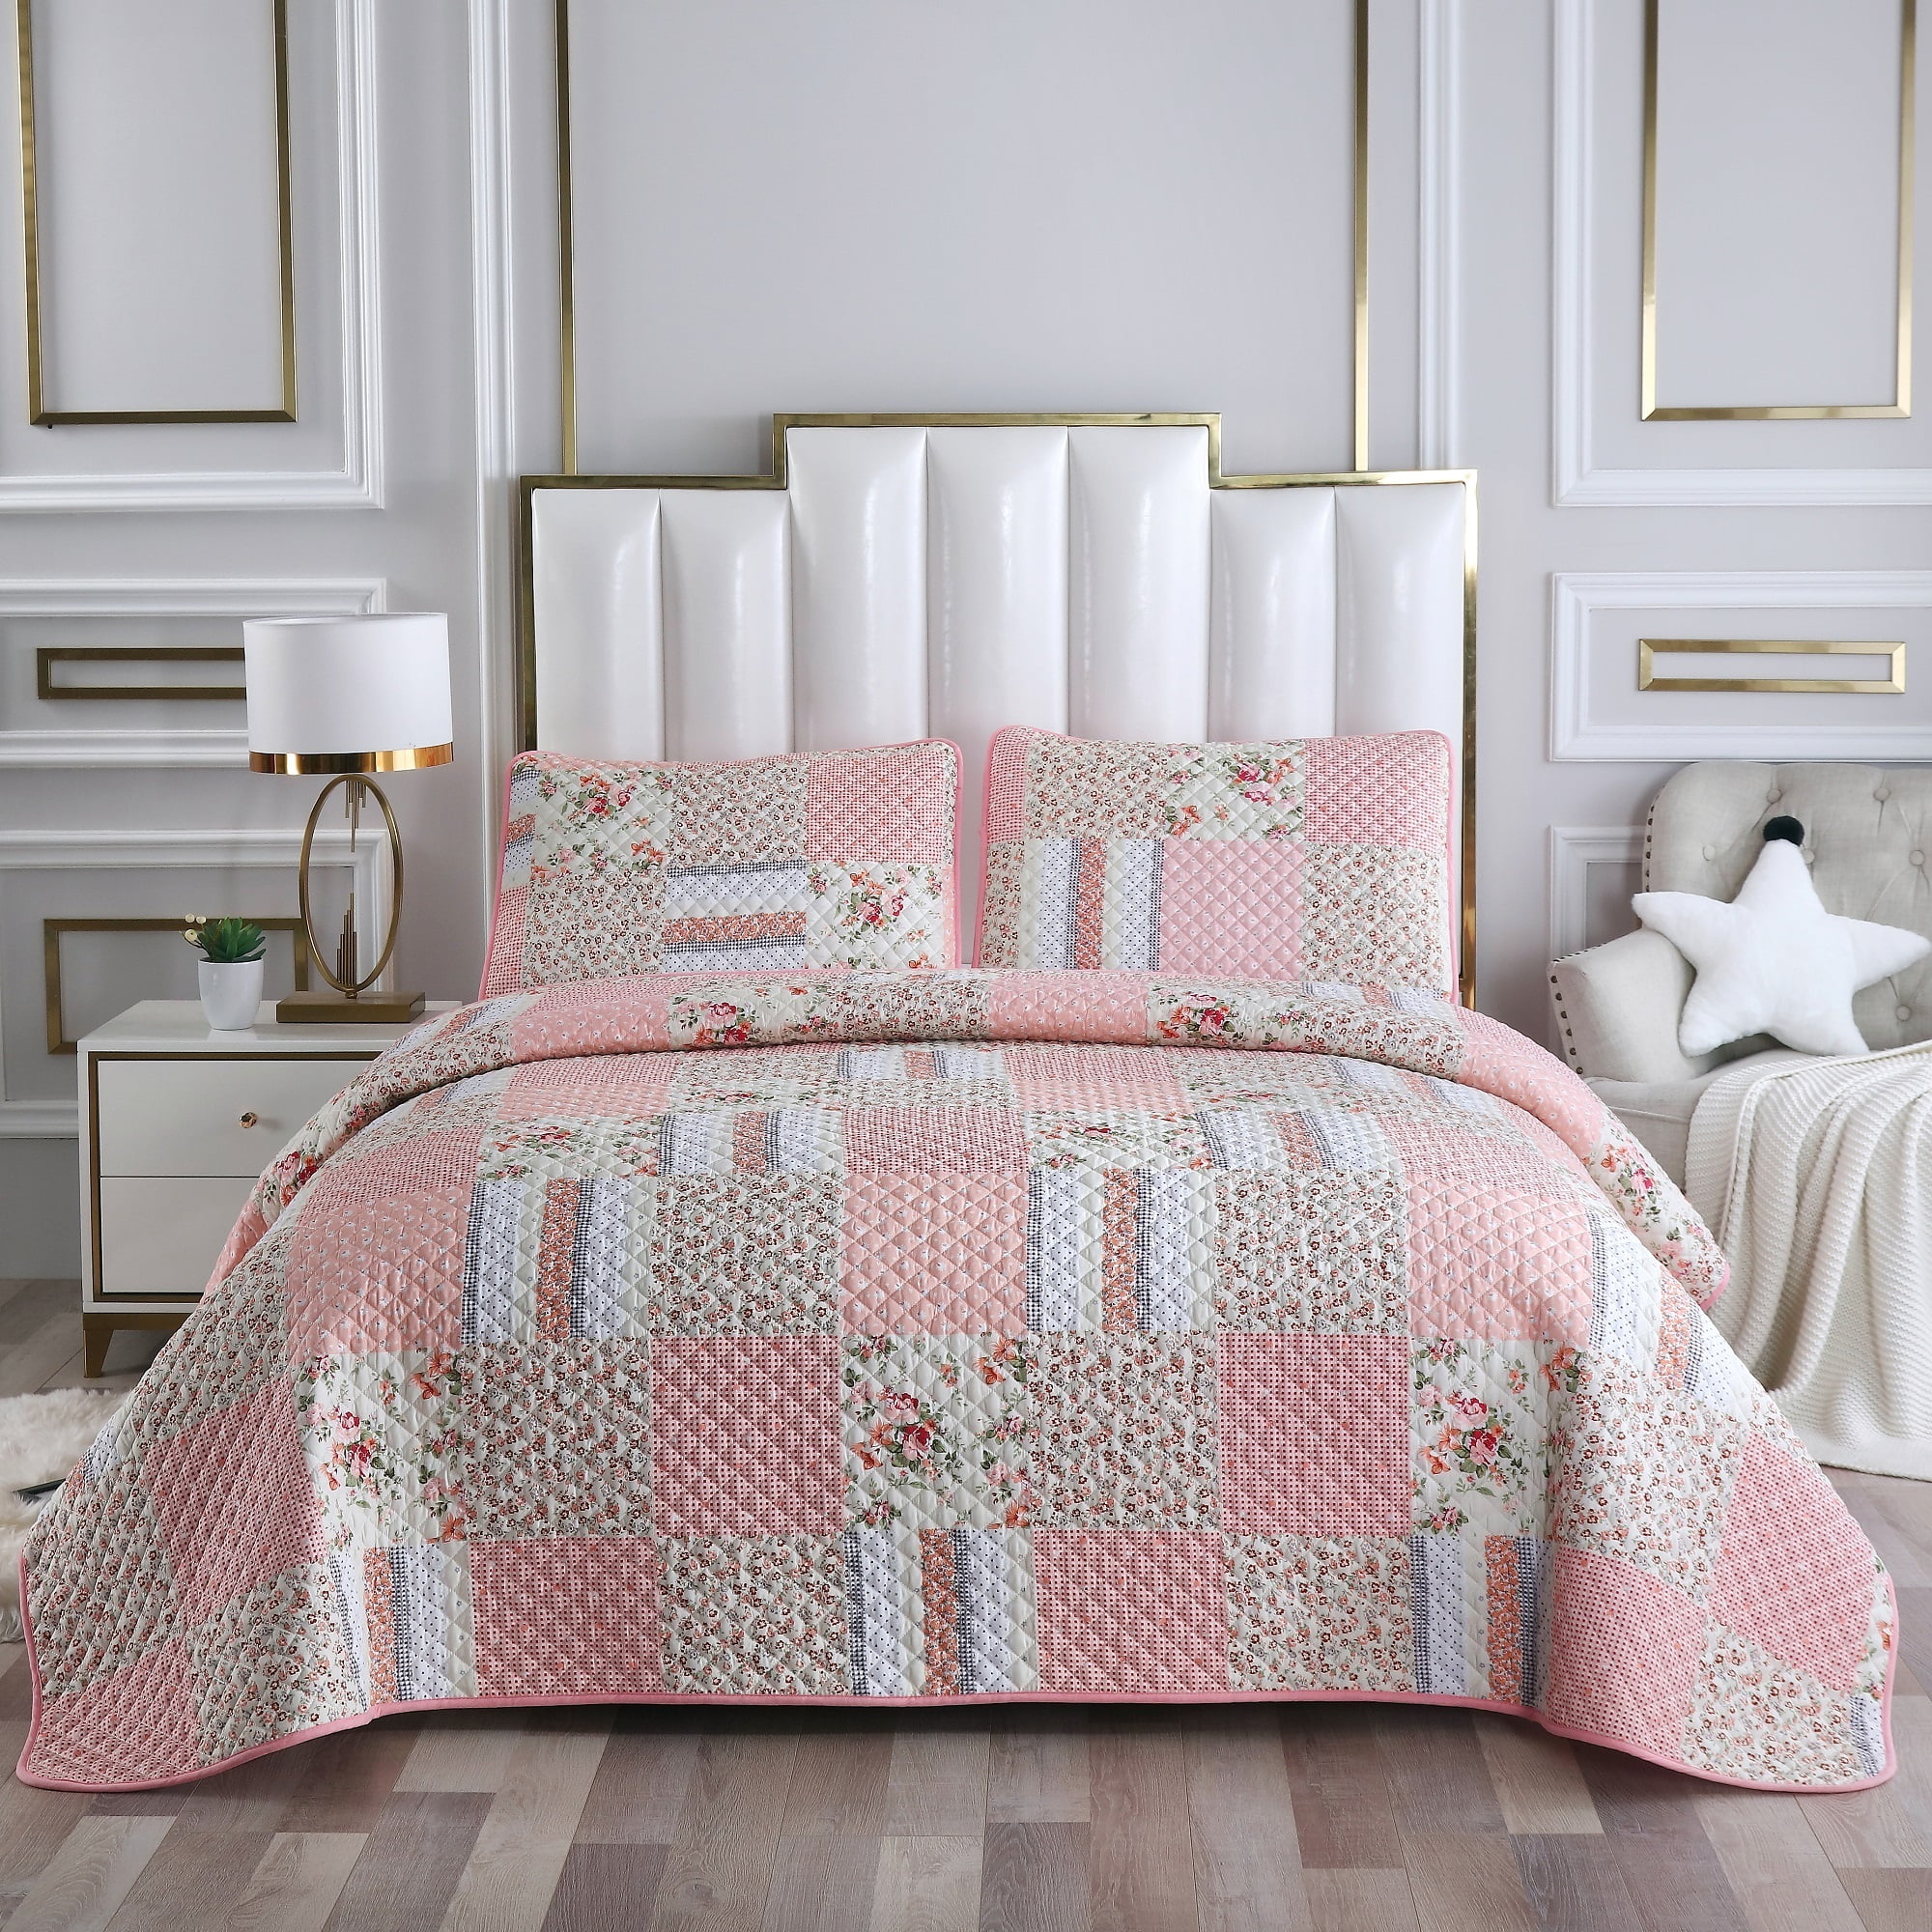 Details about   Pottery Barn Kids Pink Quilted Bedspread Twin Comforter And Pillow Sham Set 